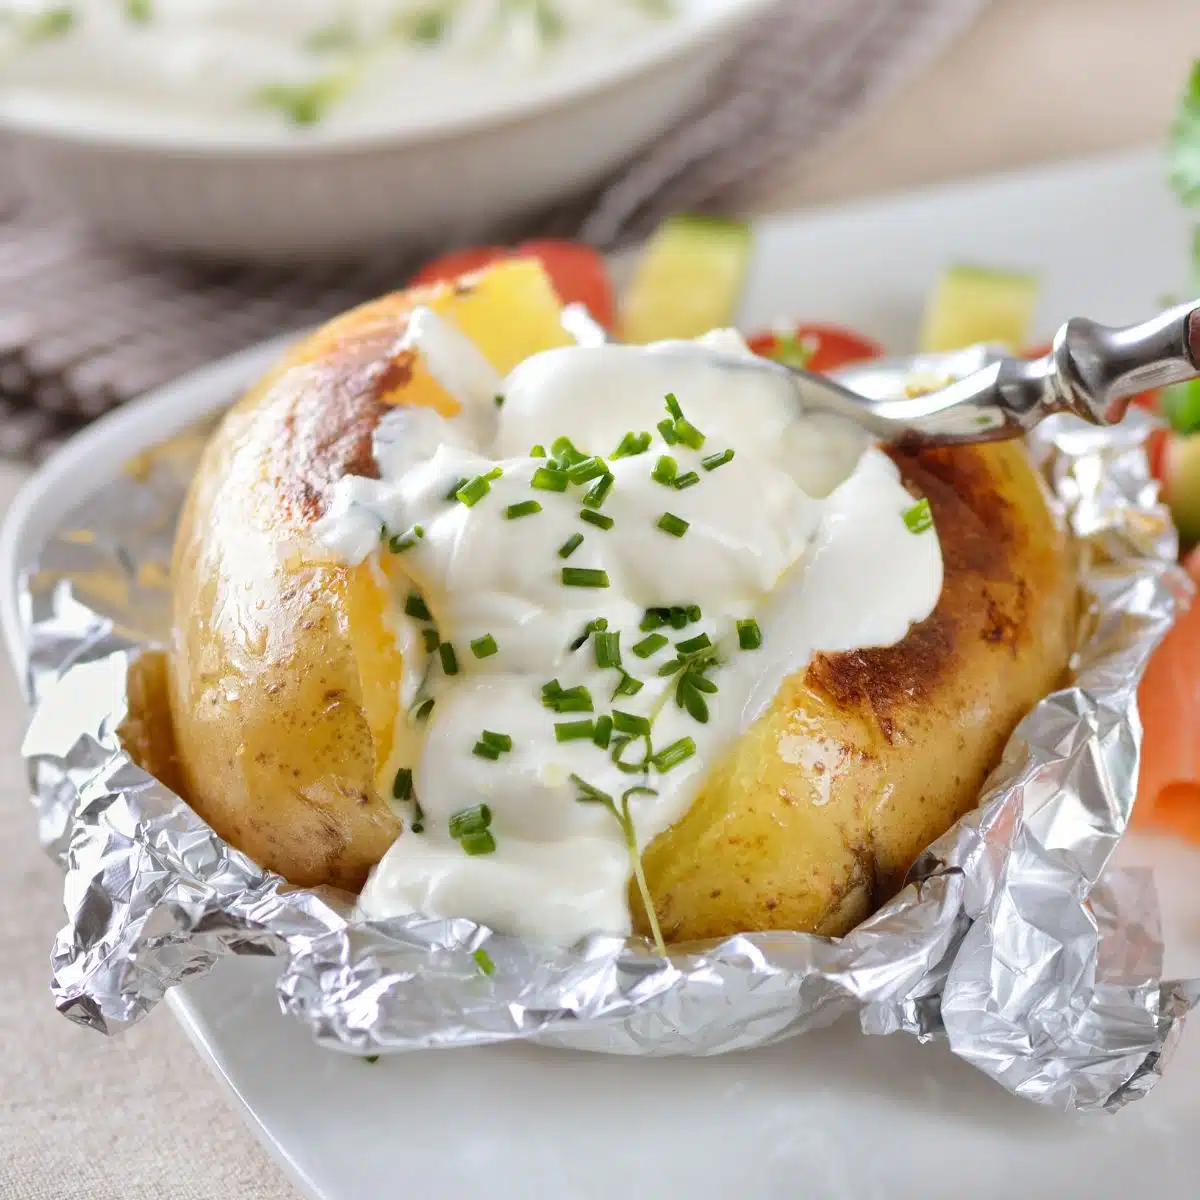 Square image showing a baked potato on a white plate, with sour cream and chives.